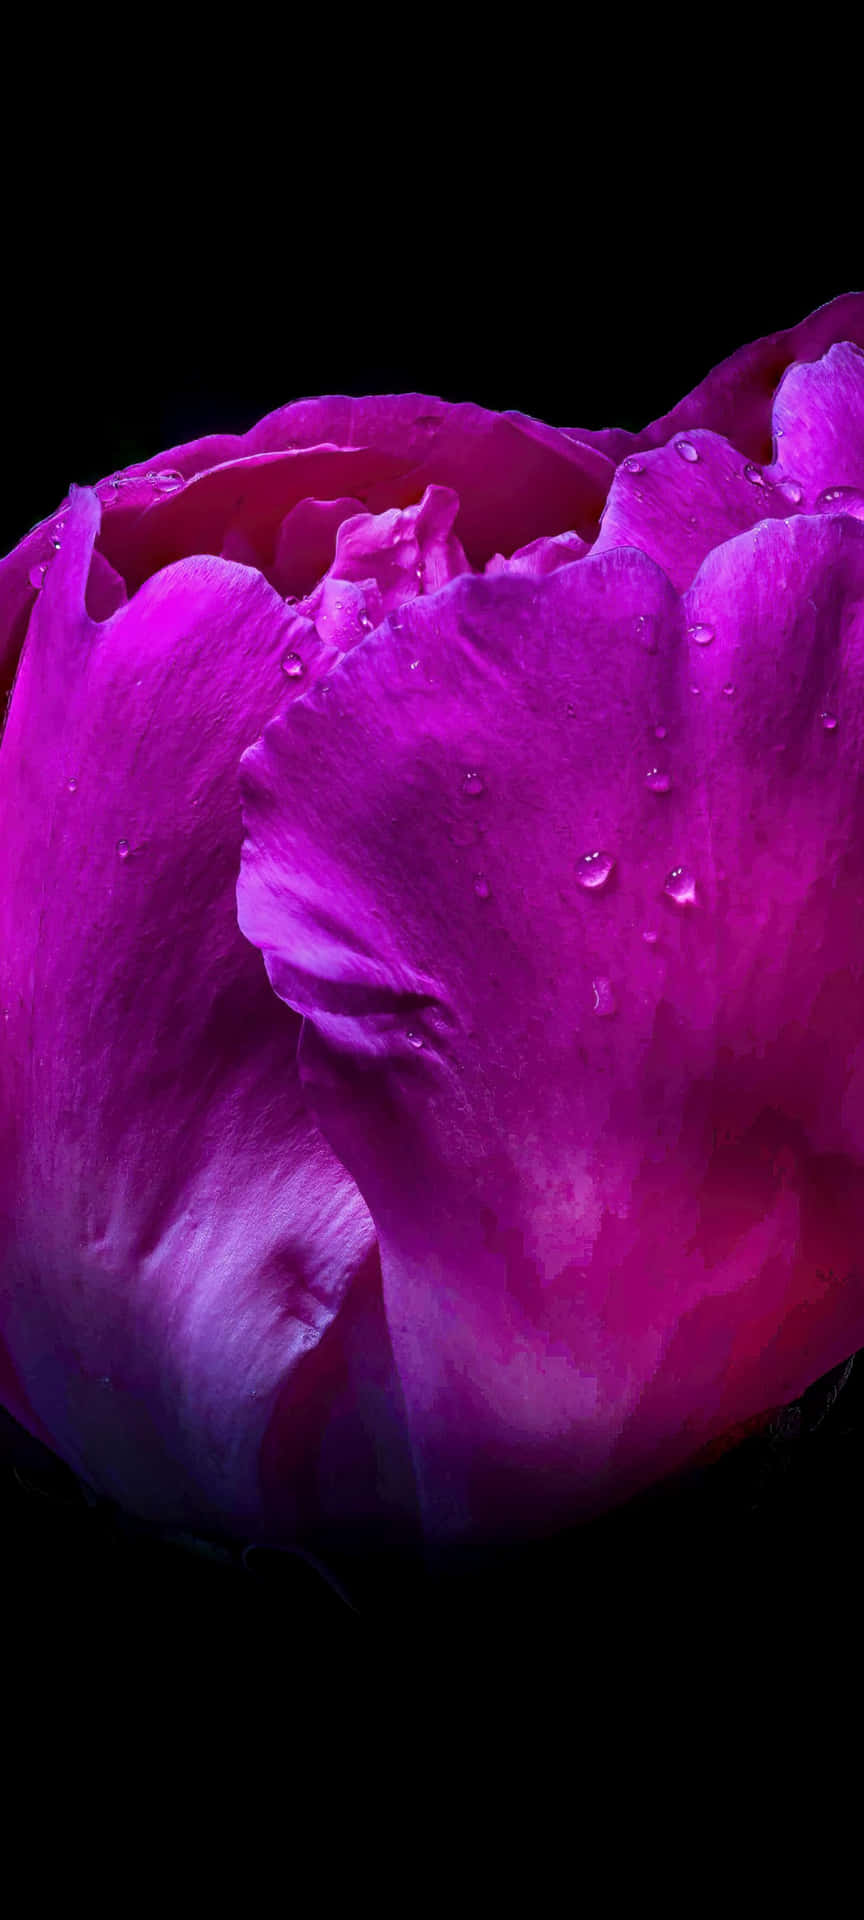 Wet Peony Black And Pink Flower Wallpaper